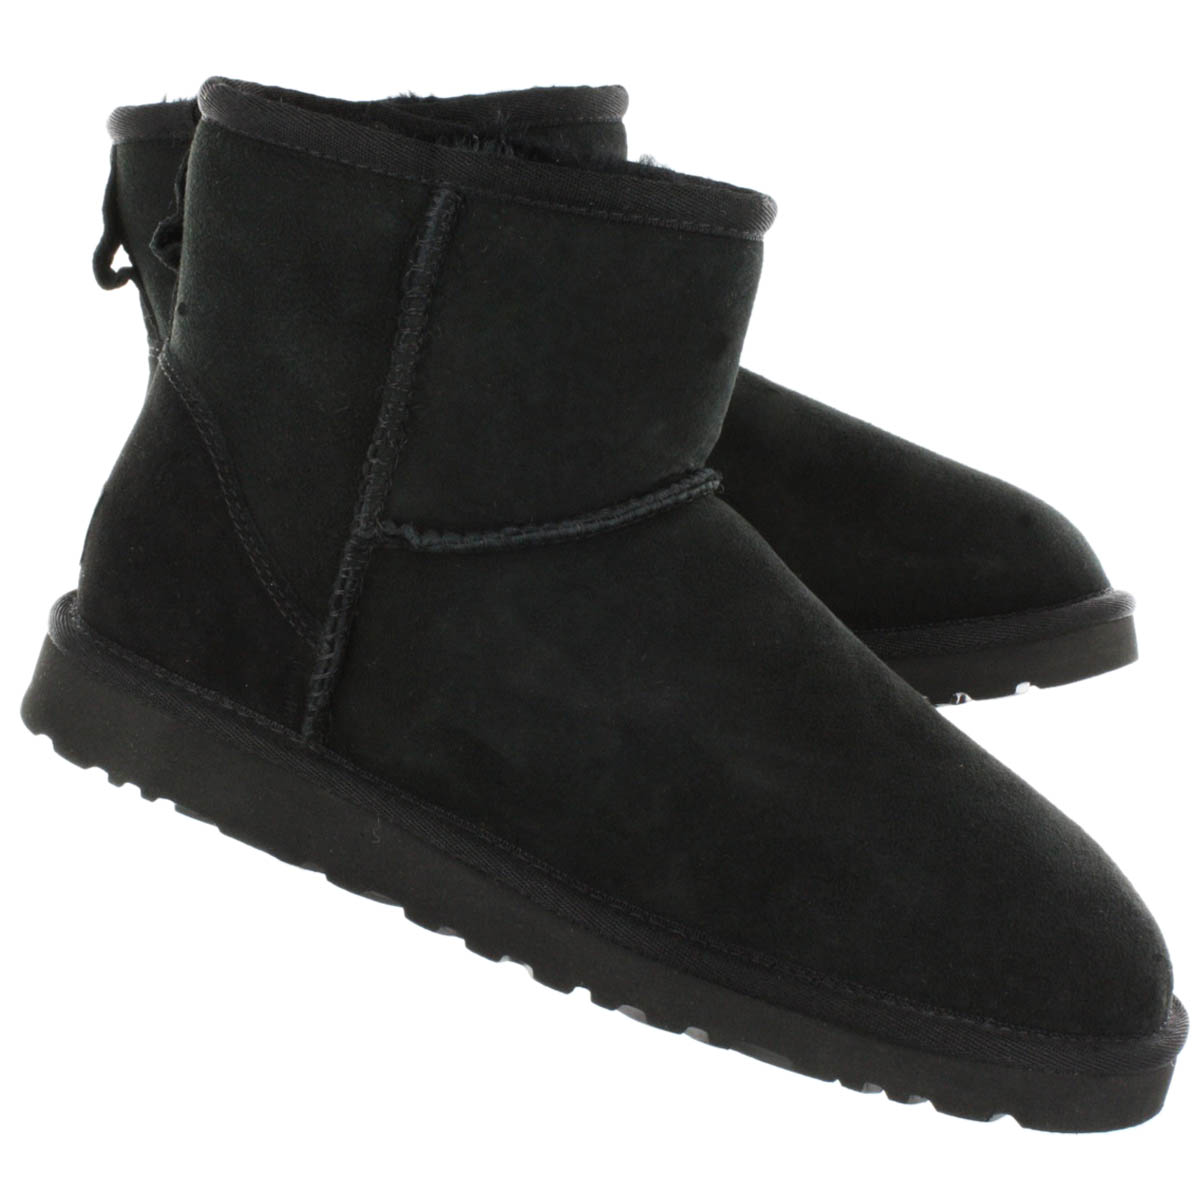 Cheap Uggs Boots For Babies For Sale